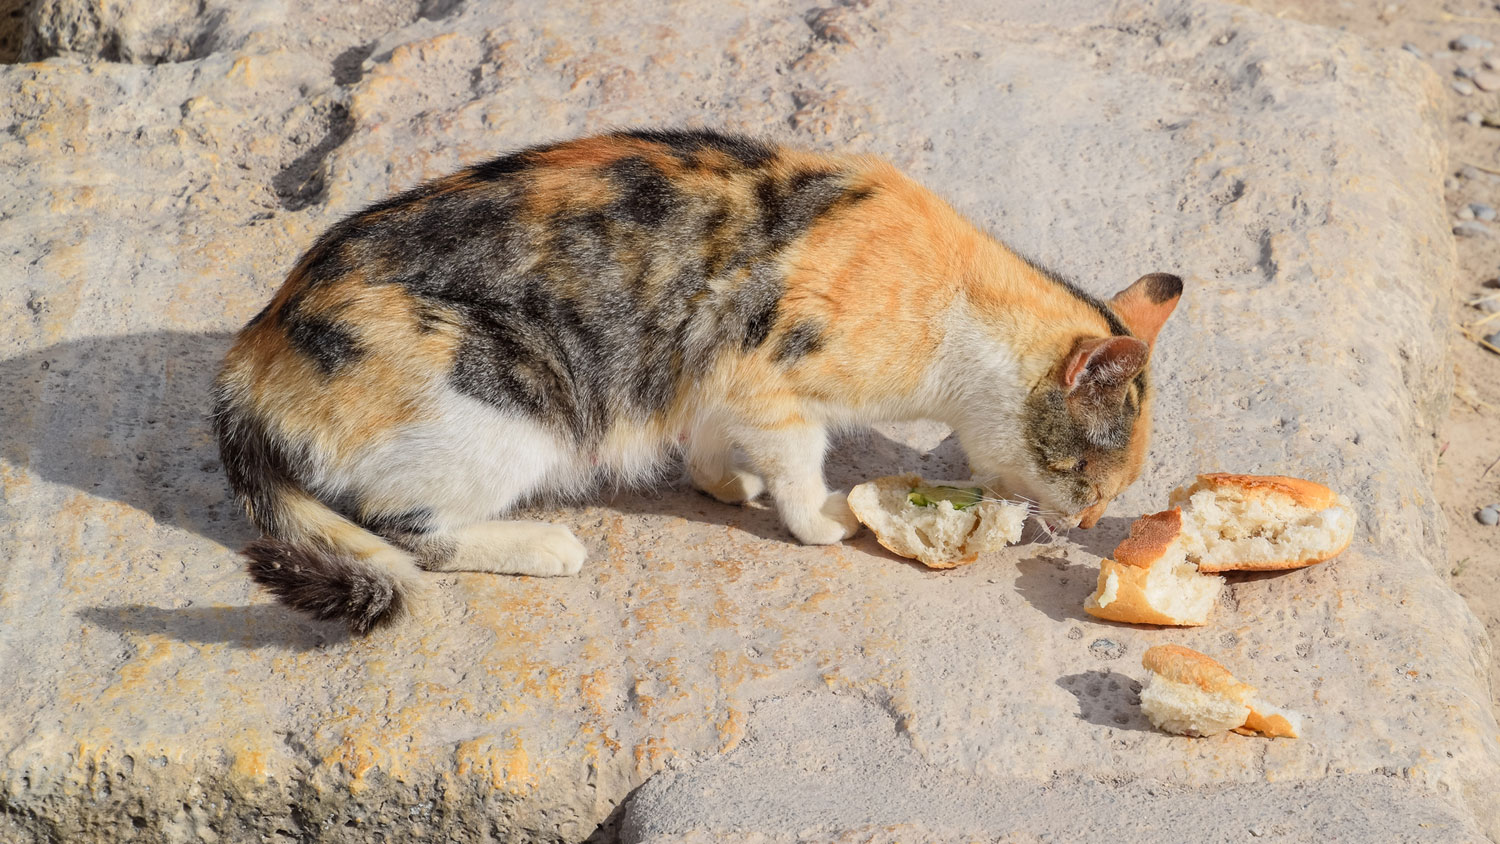 A cat eating some bread off the ground